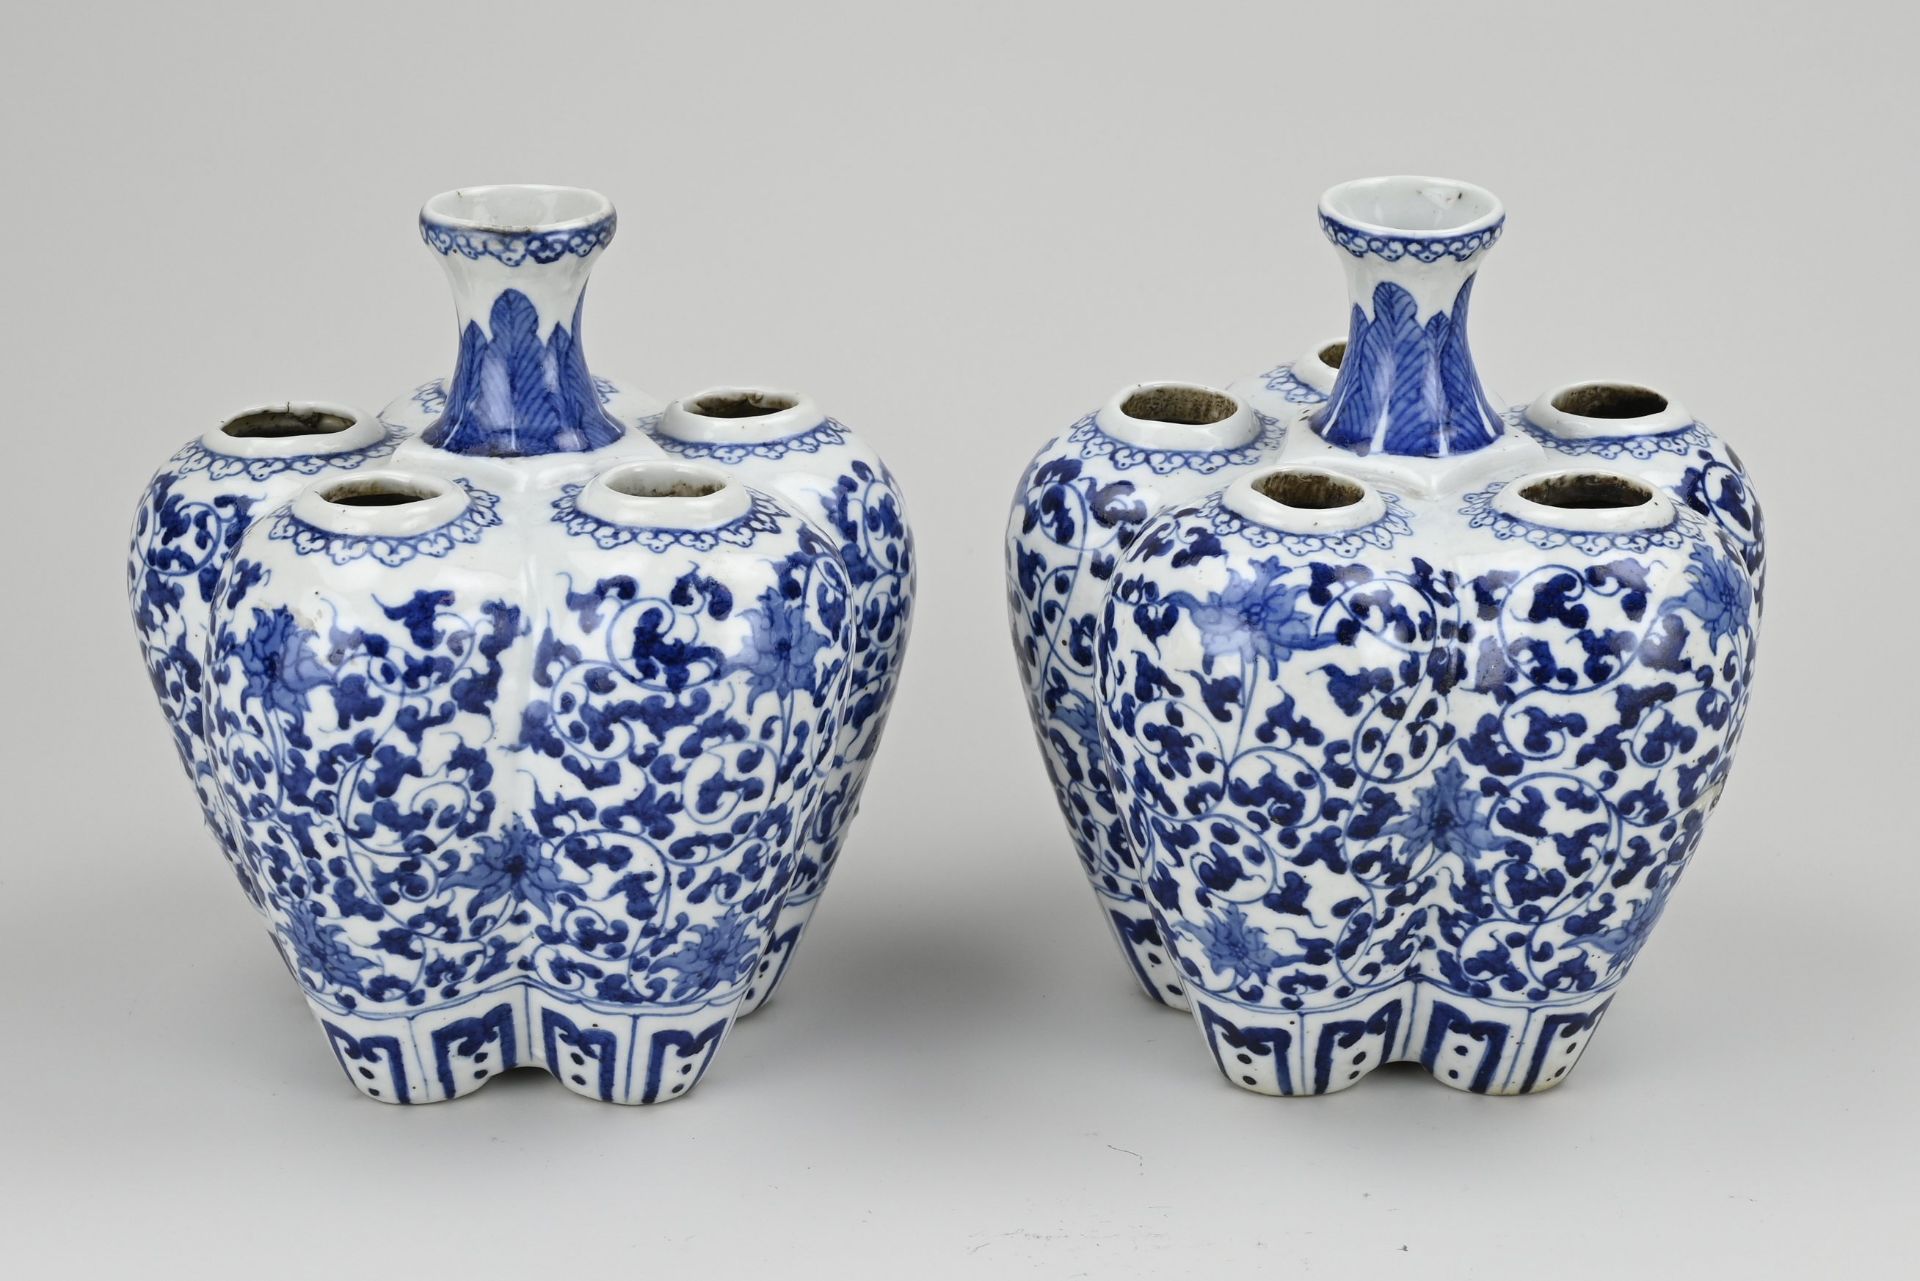 Two Chinese tulip vases - Image 2 of 3